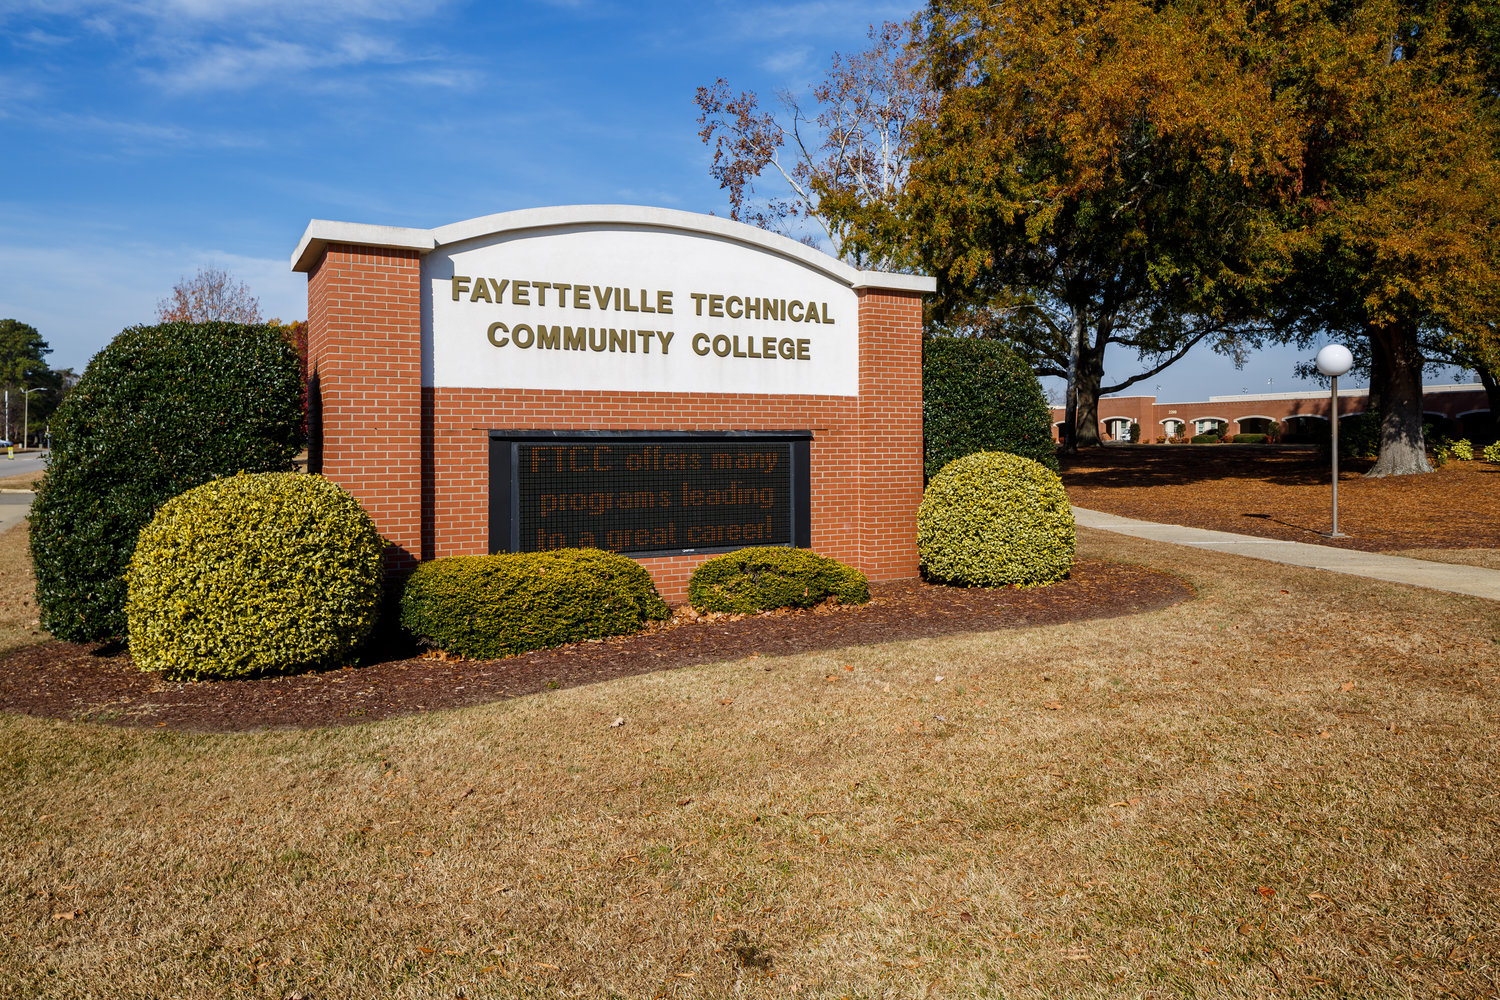 A Skilled Trades & Technology Expo that had been scheduled for June 16 at Fayetteville Technical Community College has been rescheduled for June 28, organizers said.